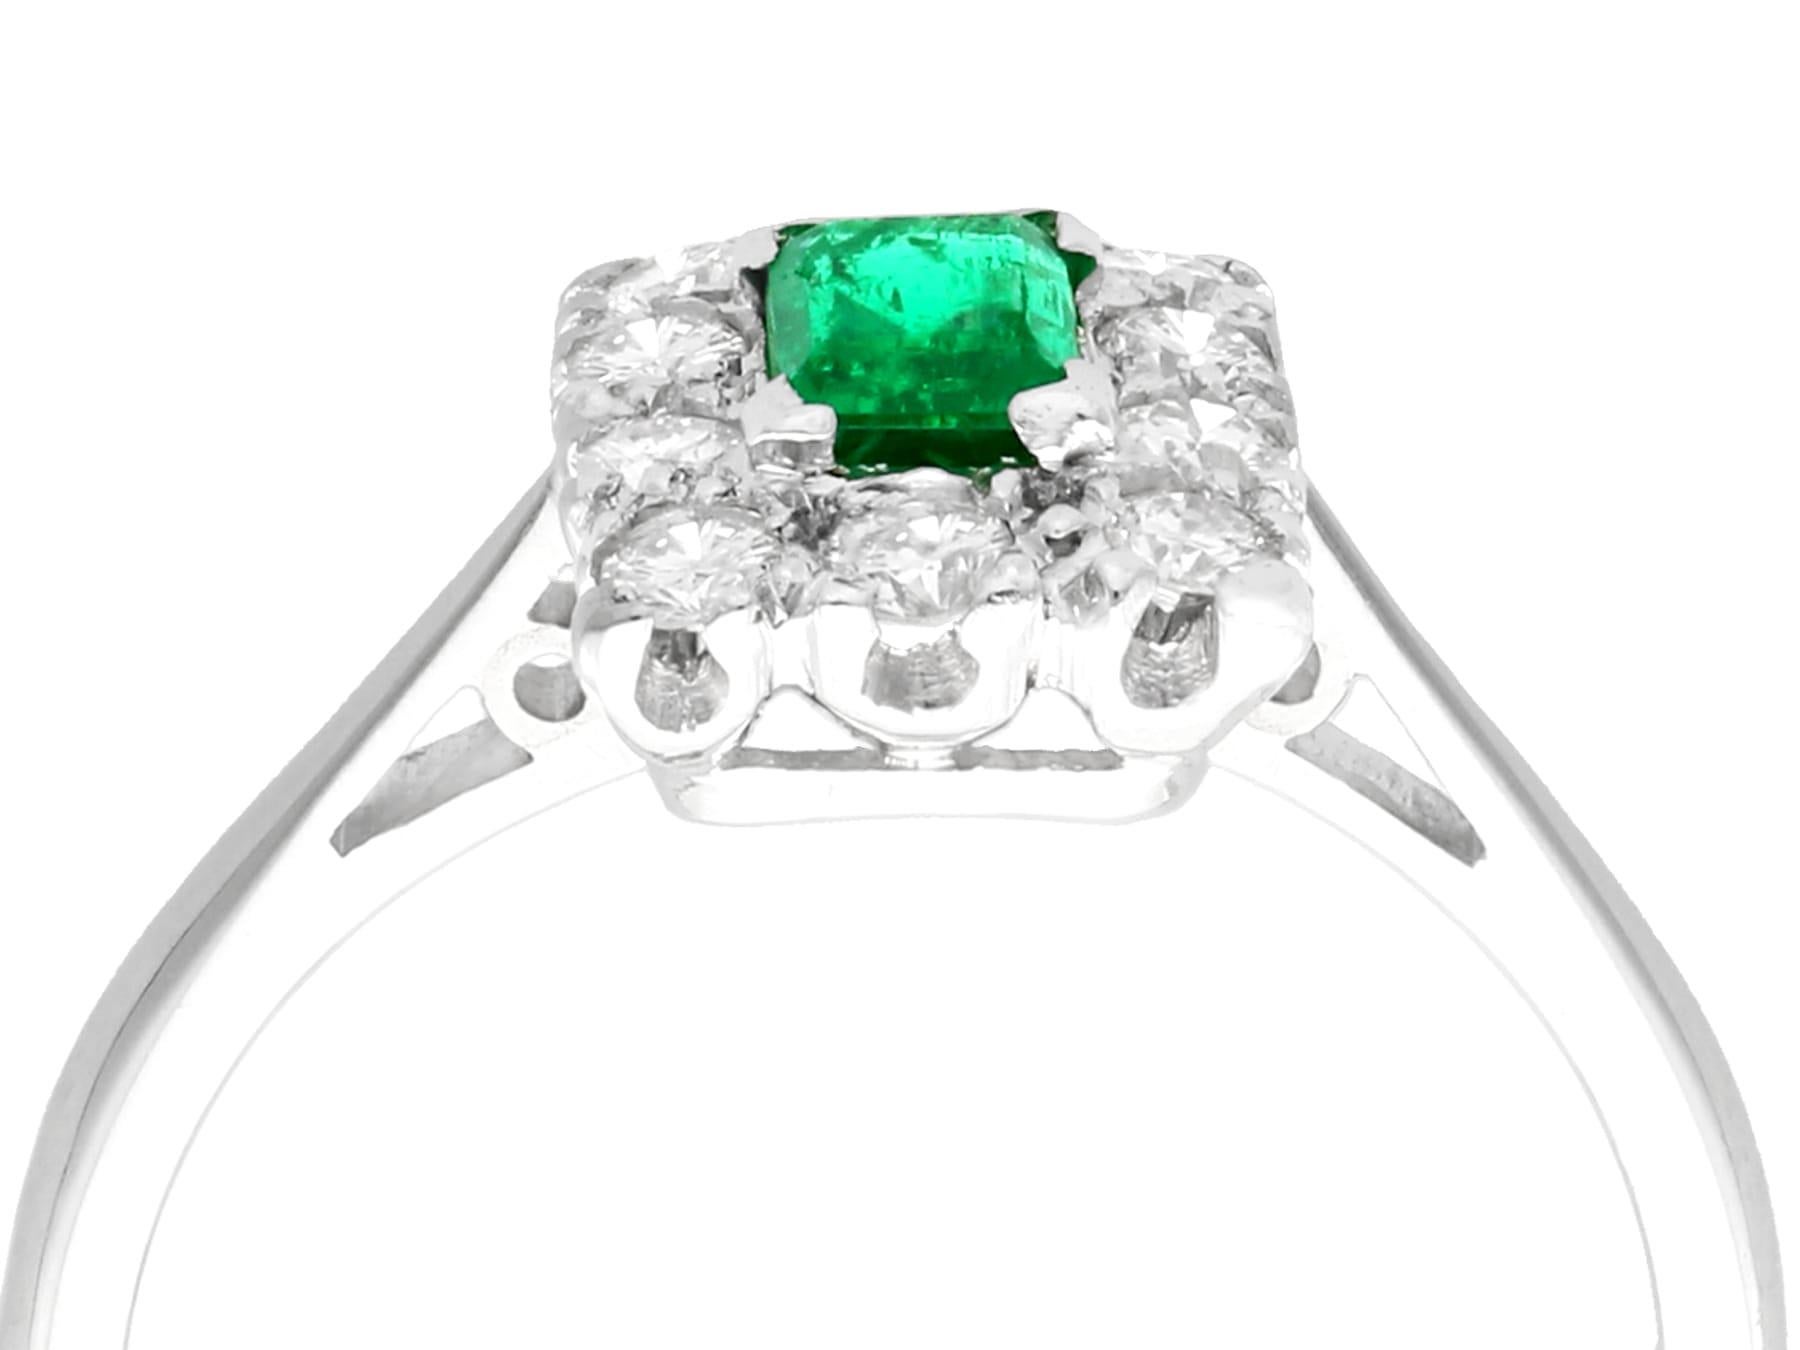 A fine and impressive 0.28 Carat emerald and 0.30 Carat diamond, 18 karat white gold cluster ring; part of our diverse vintage jewelry collections

This fine and impressive vintage emerald and diamond cluster ring has been crafted in 18k white